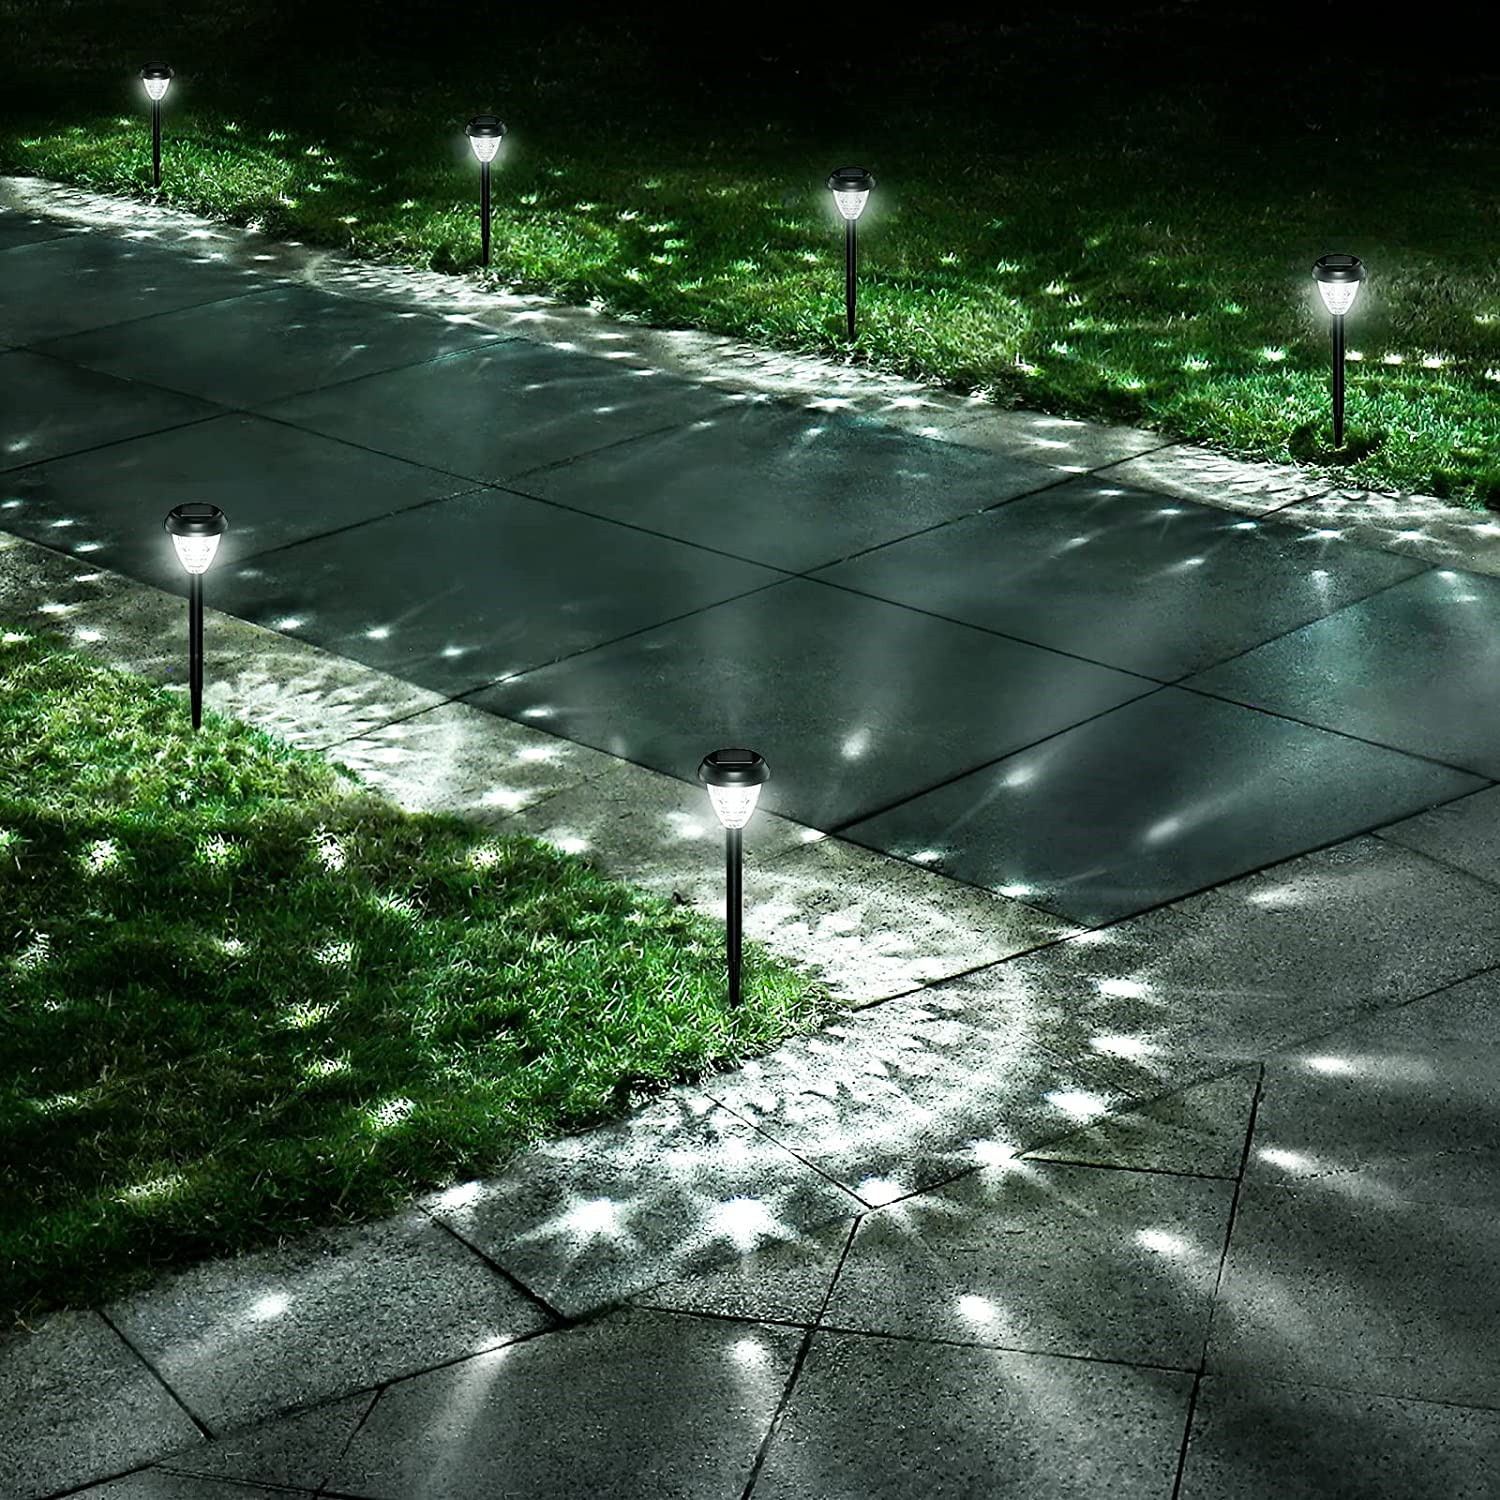 Skyline Lighting Inc. Provides Solar Path Lights for Douglas Elliman Project in New York, Delivering Eco-Friendly and High-Quality Lighting Solution.